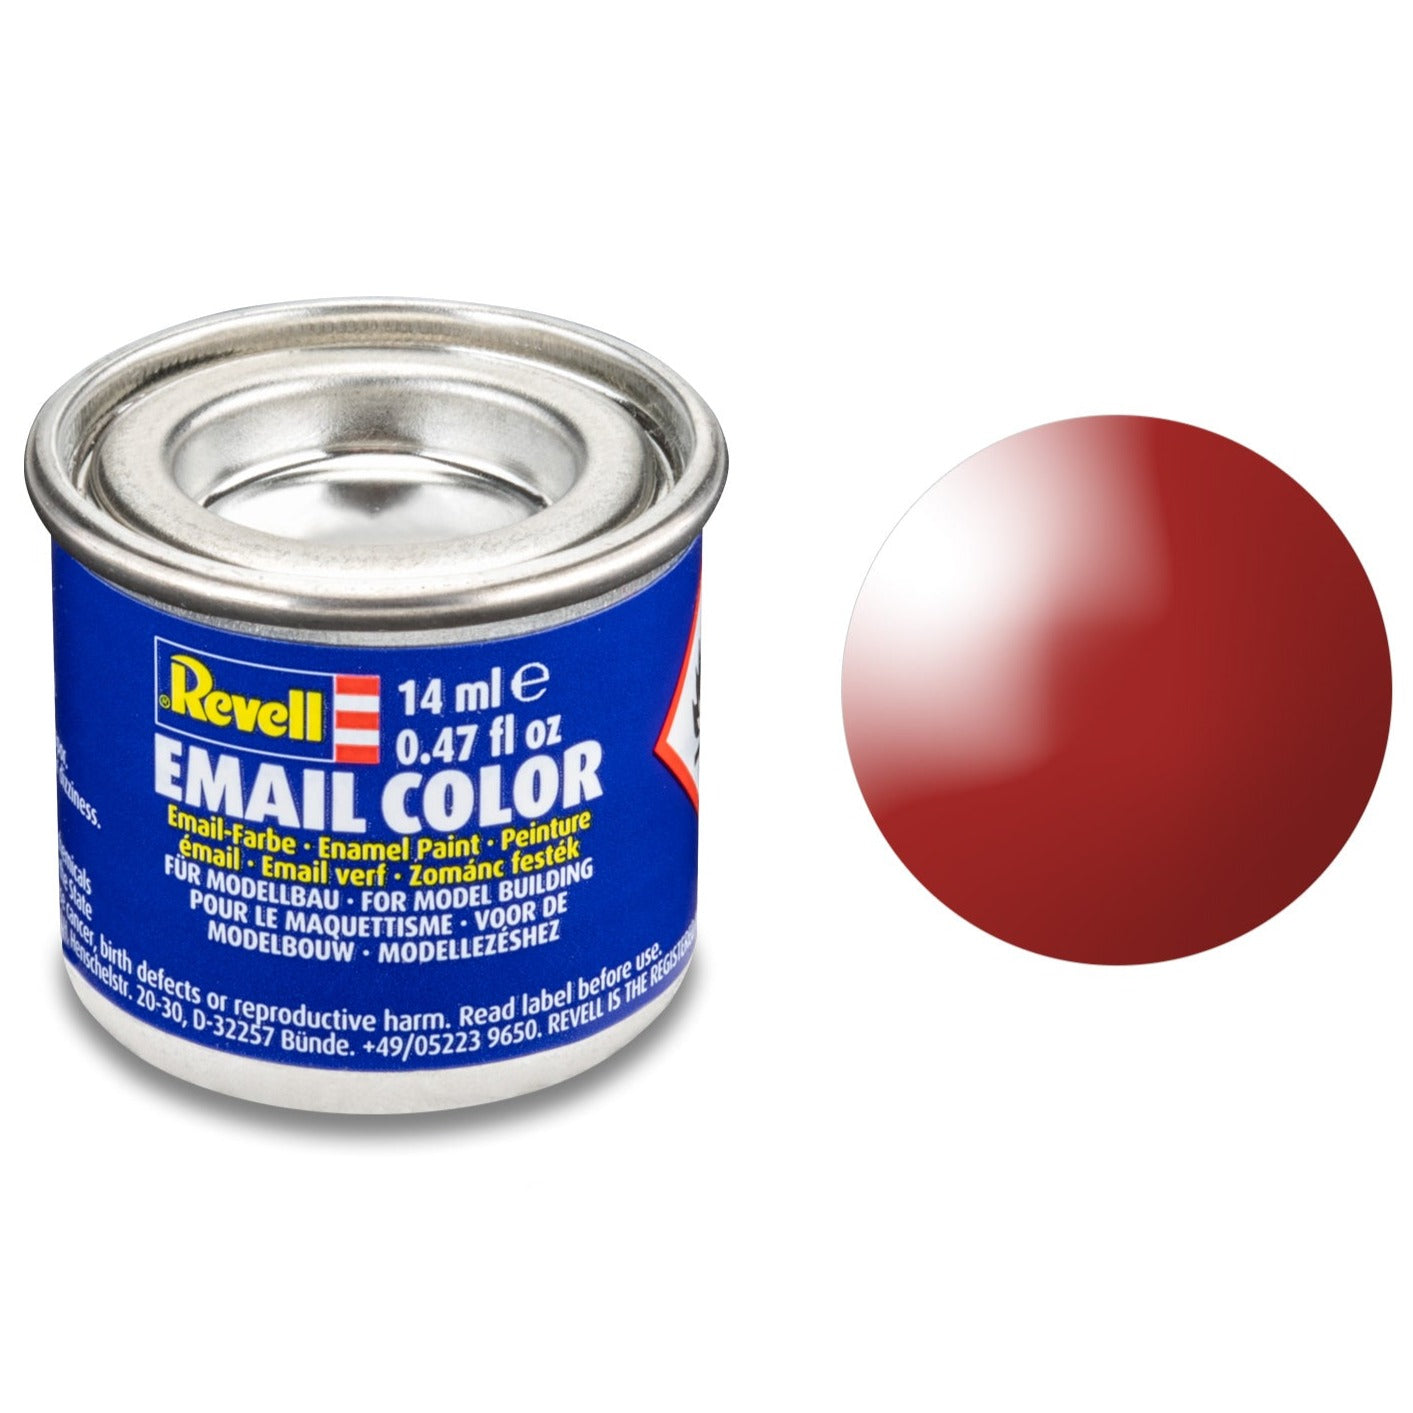 Revell Gloss "Fiery Red" (RAL 3000) Enamel Paint - 14ml - 32131 - Loaded Dice Barry Vale of Glamorgan CF64 3HD